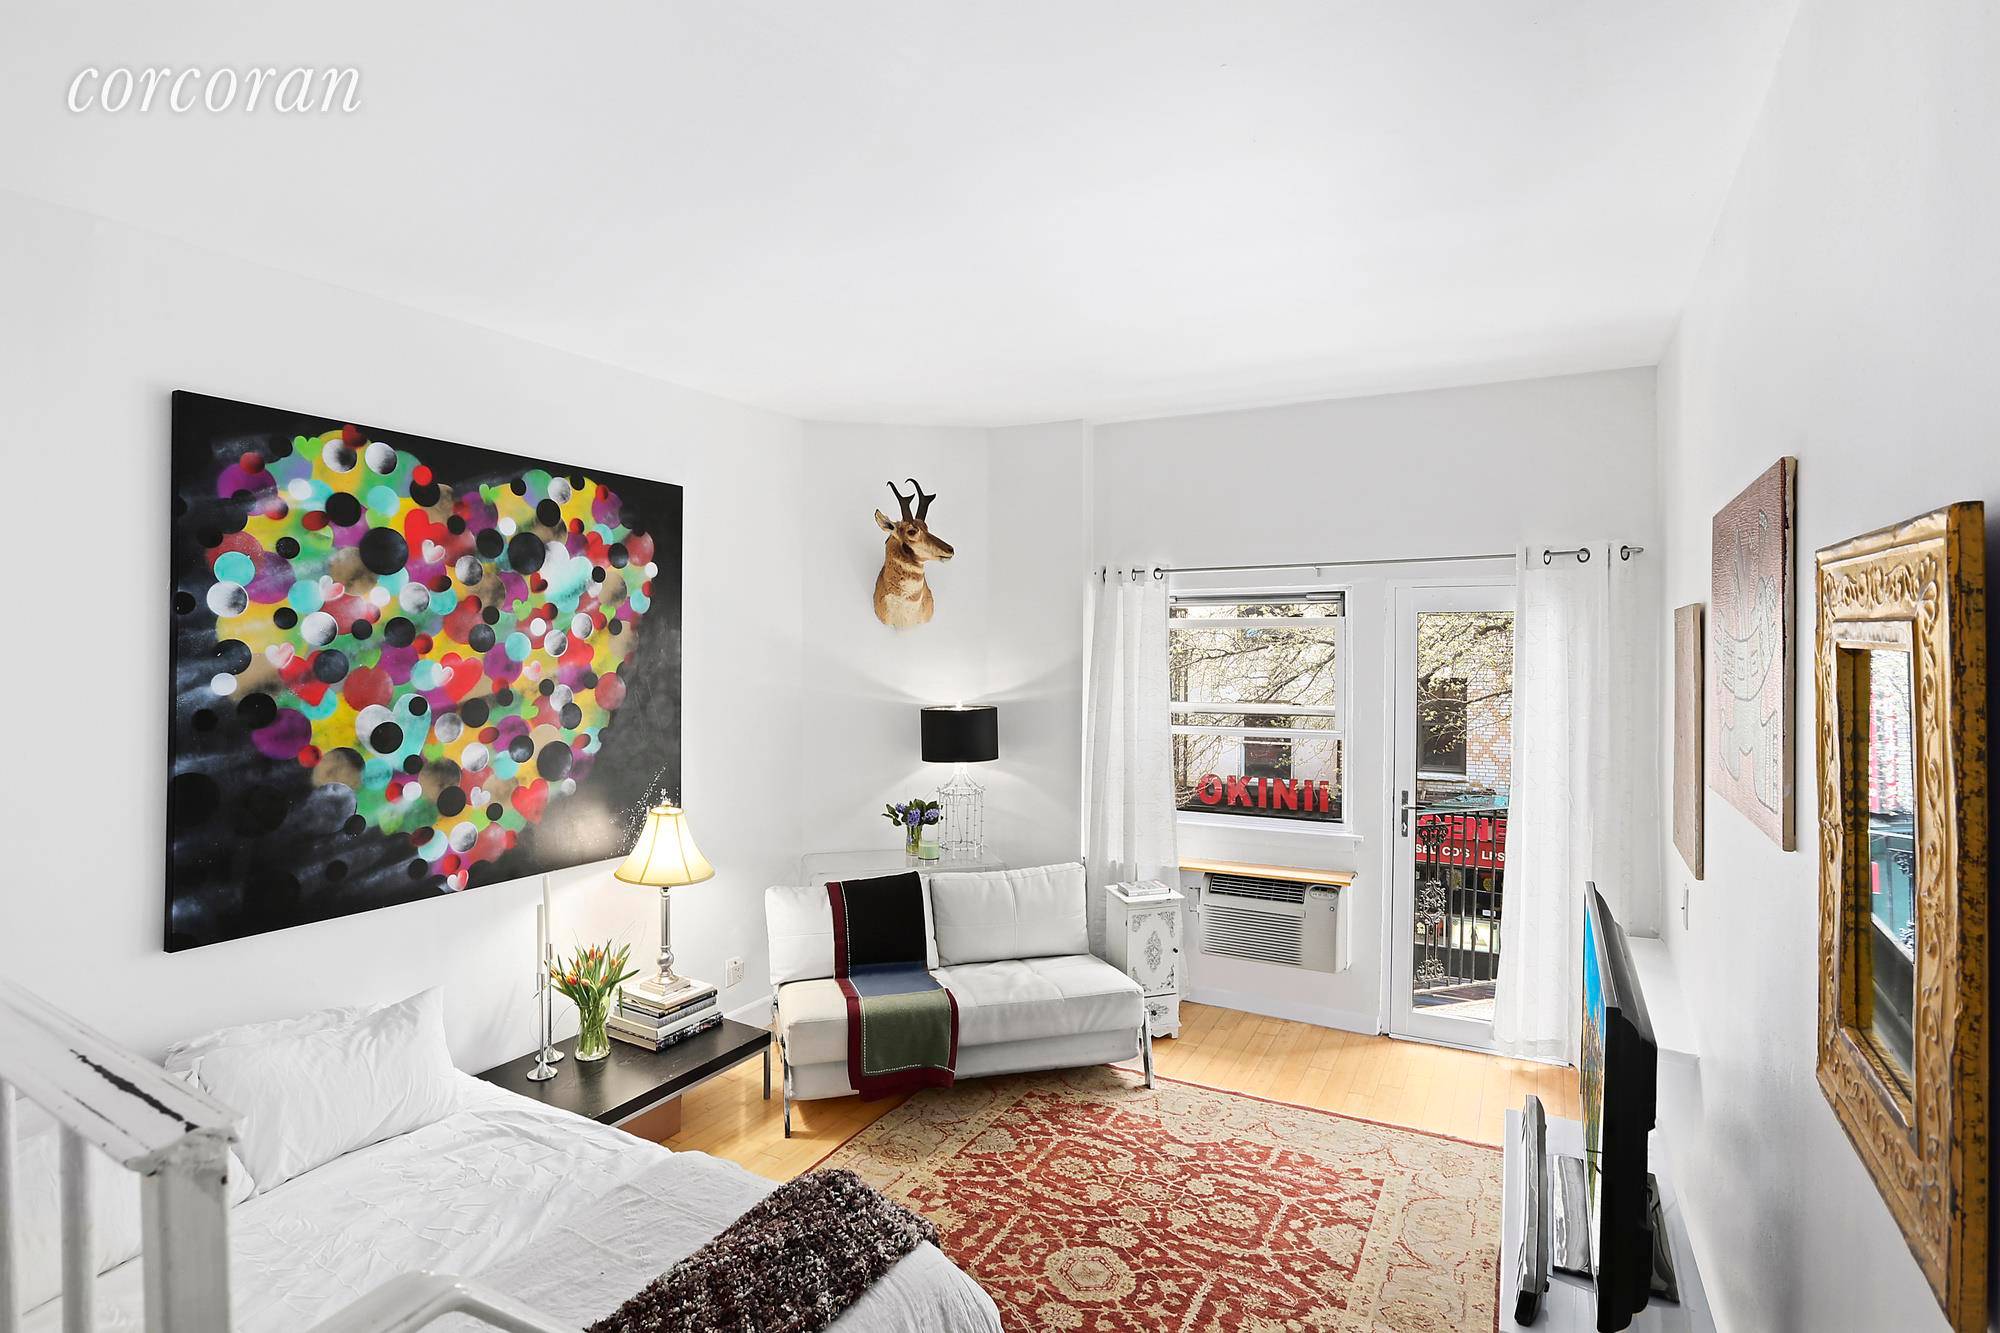 Welcome home to this wonderfully bright, airy oasis in the heart of Greenwich Village just minutes away from Washington Square Park.